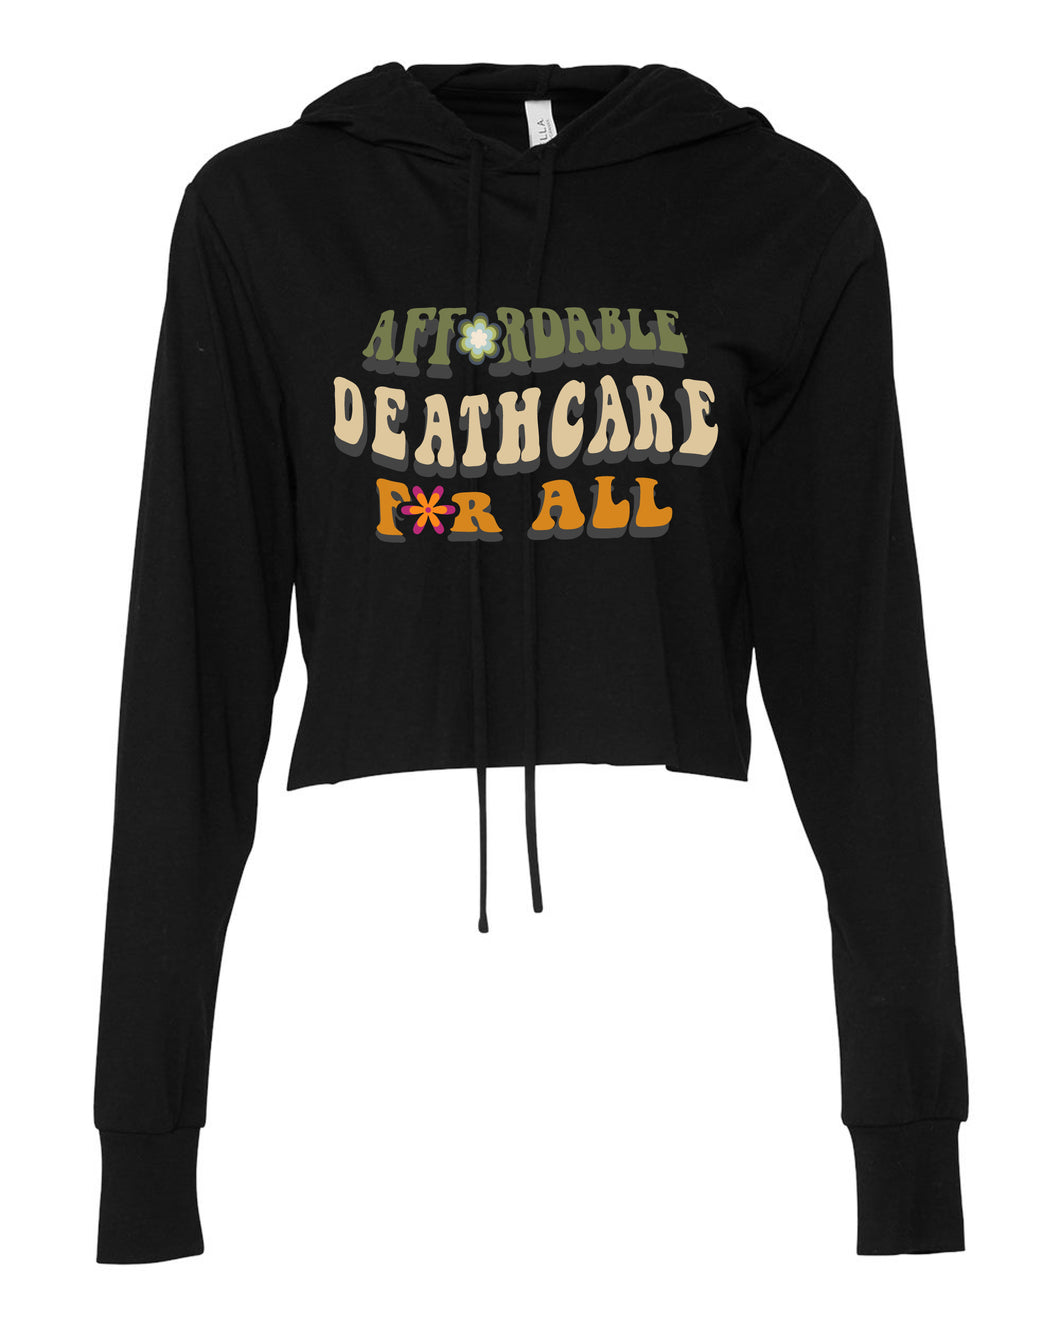 Affordable Deathcare for All Cropped Hoodie